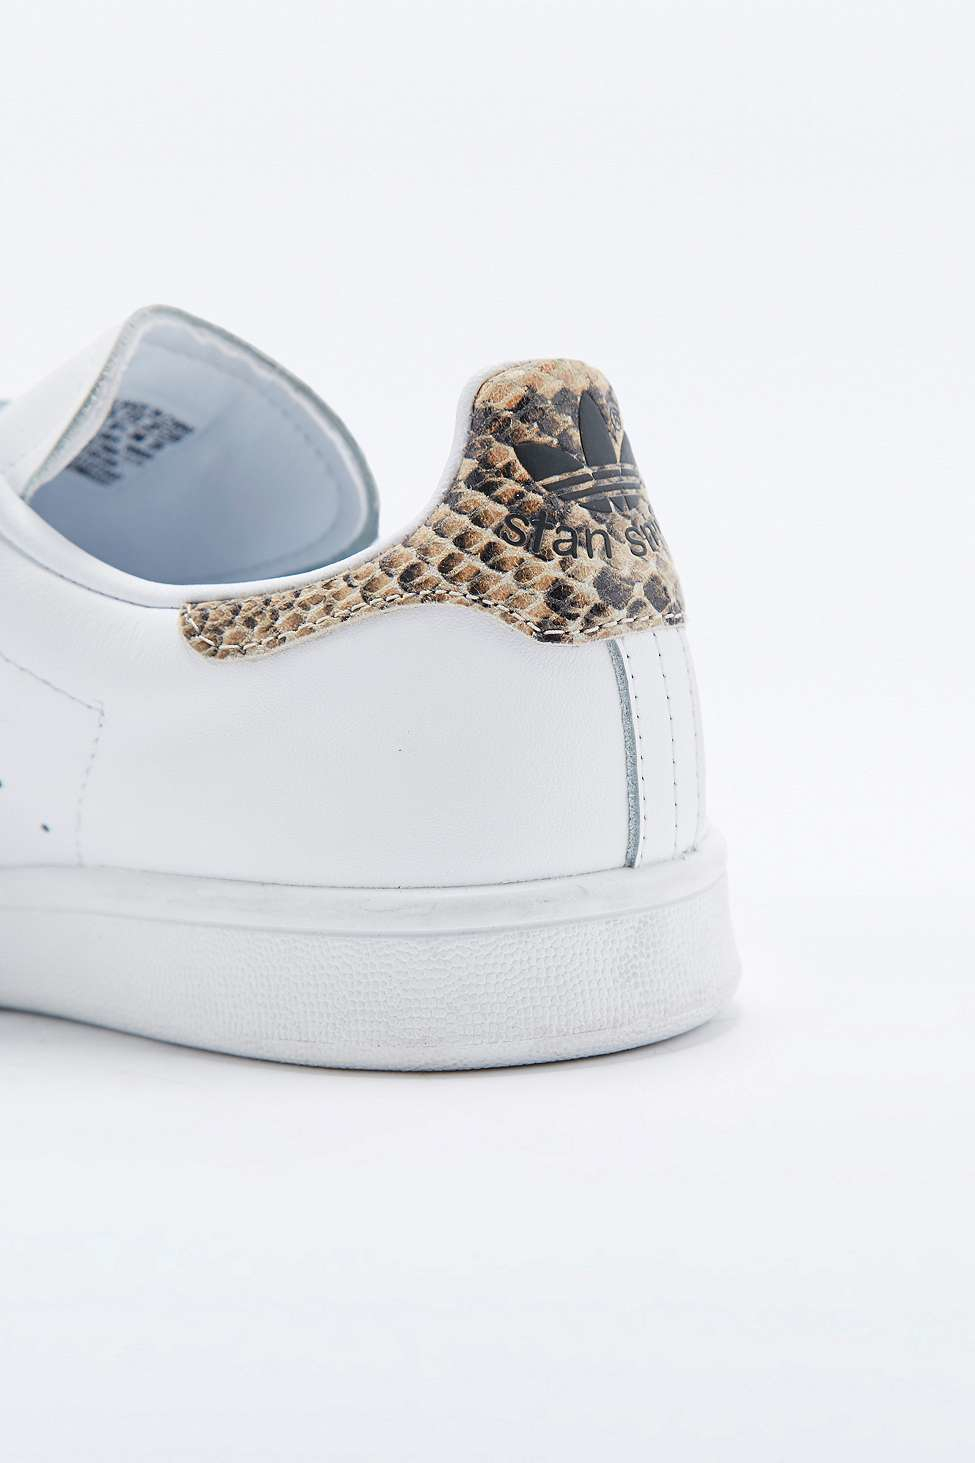 adidas Originals White Snake Velcro Stan Smith Trainers - Lyst